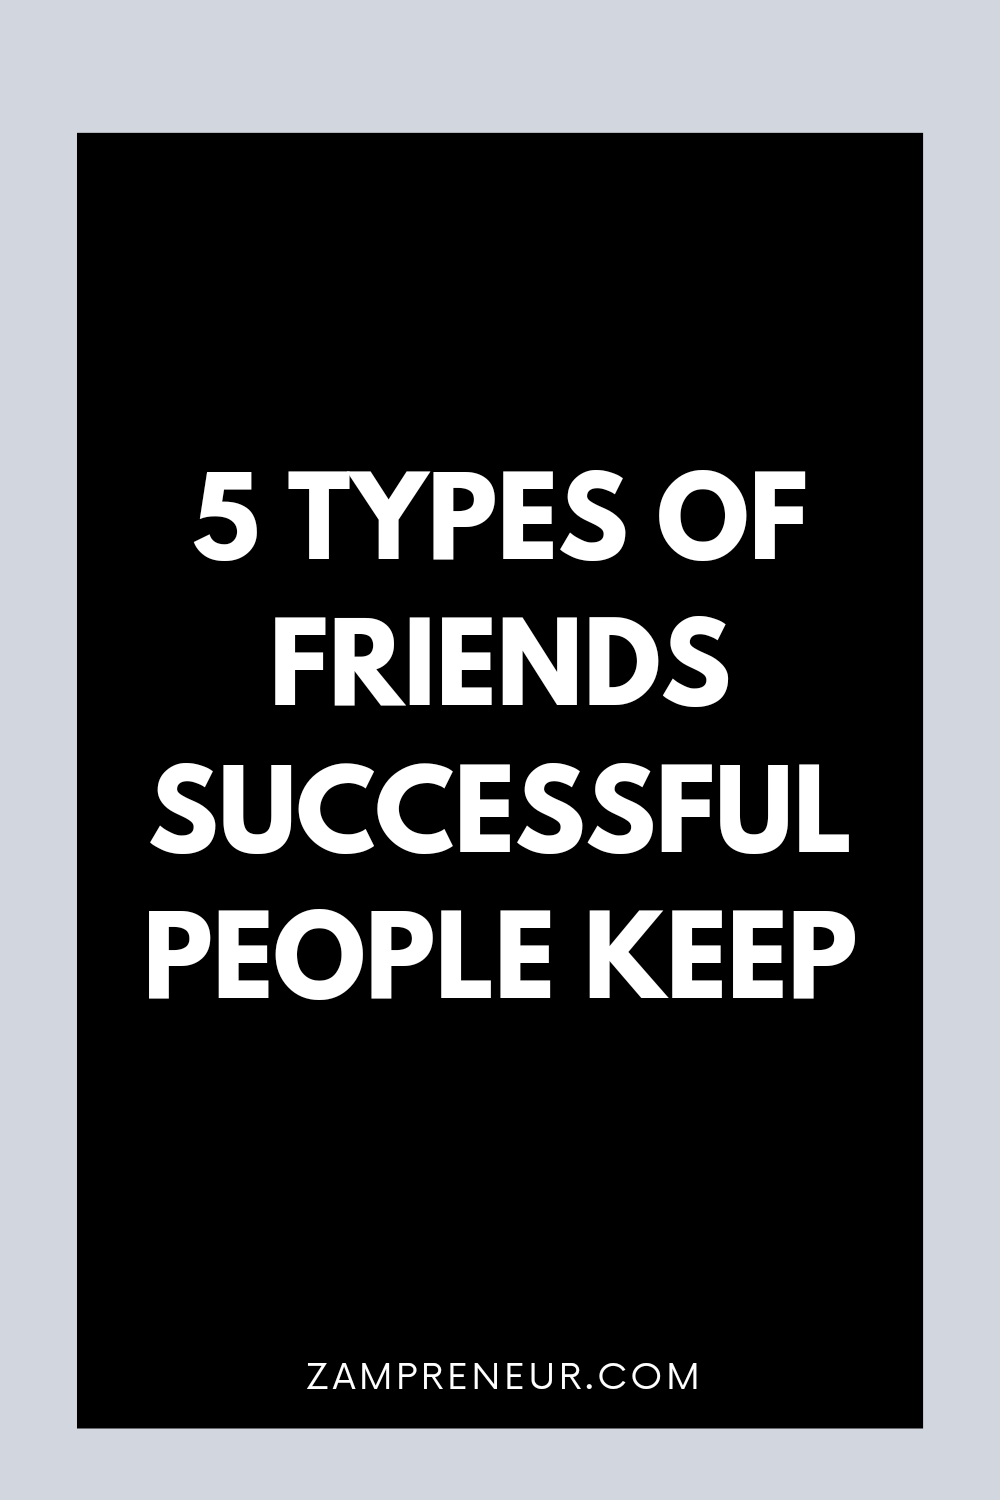 5 types of friends succesful people keep